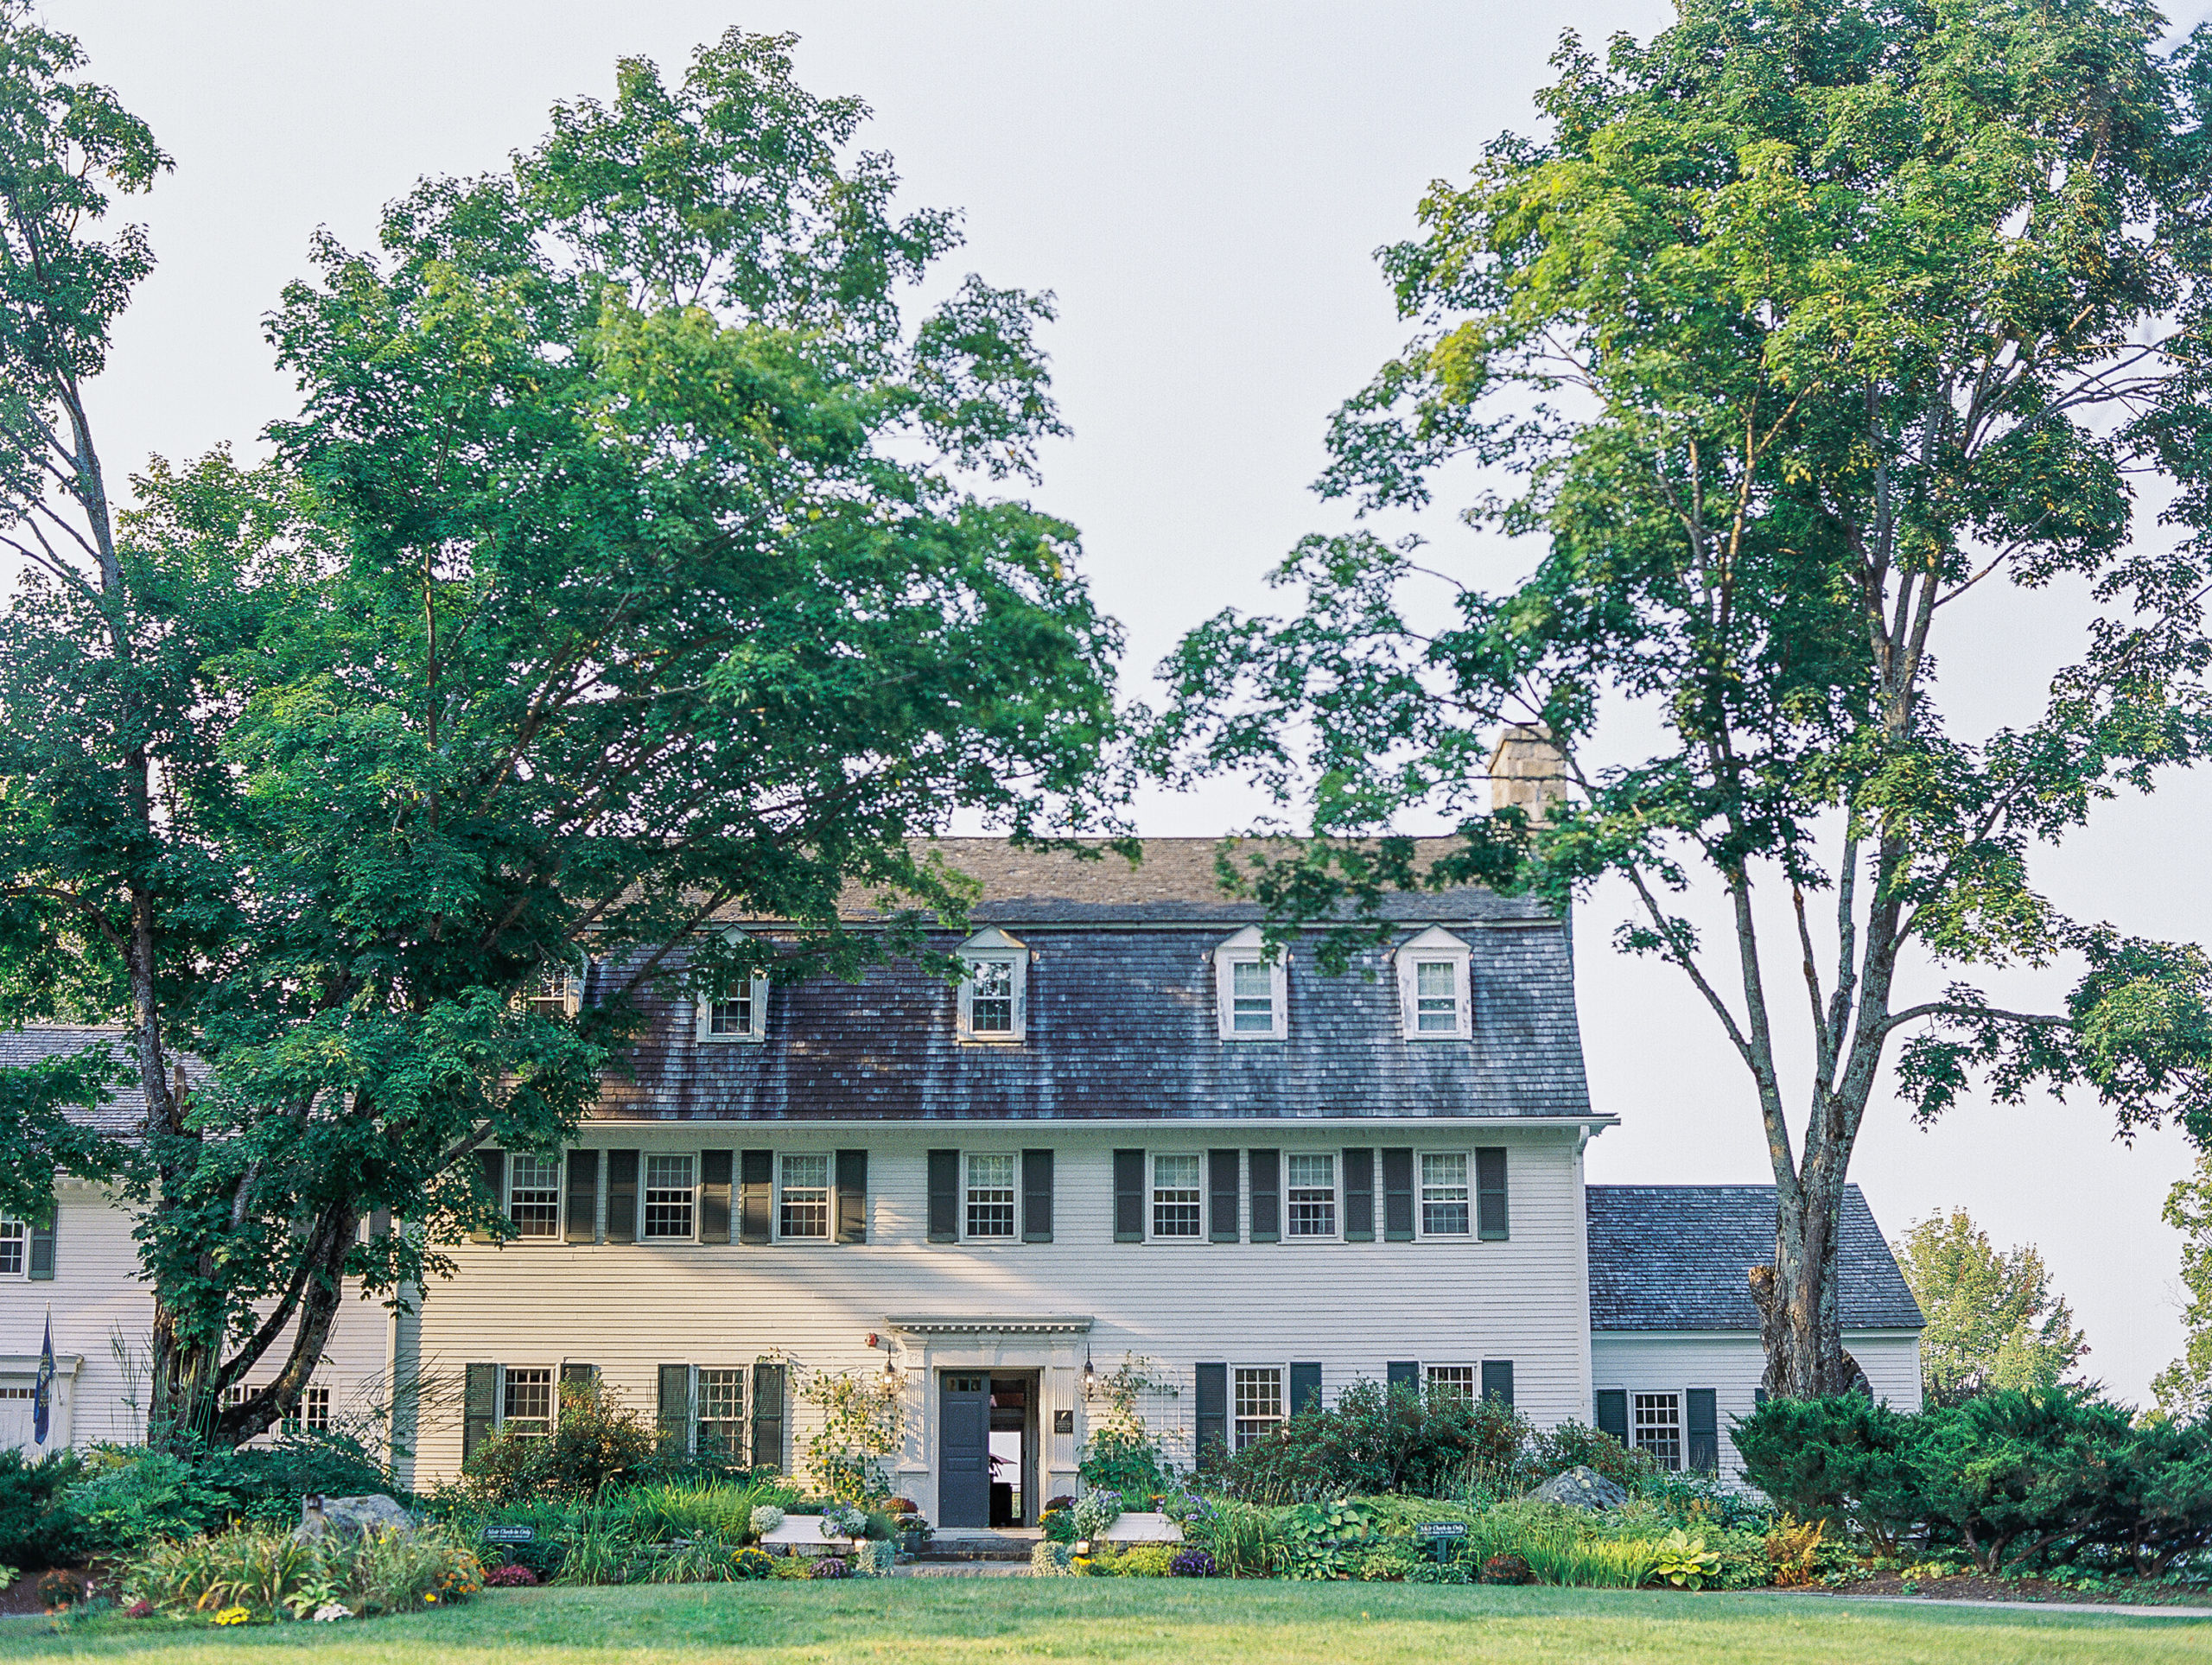 White paneled house with green landscape and trees for New Hampshire Wedding Photography